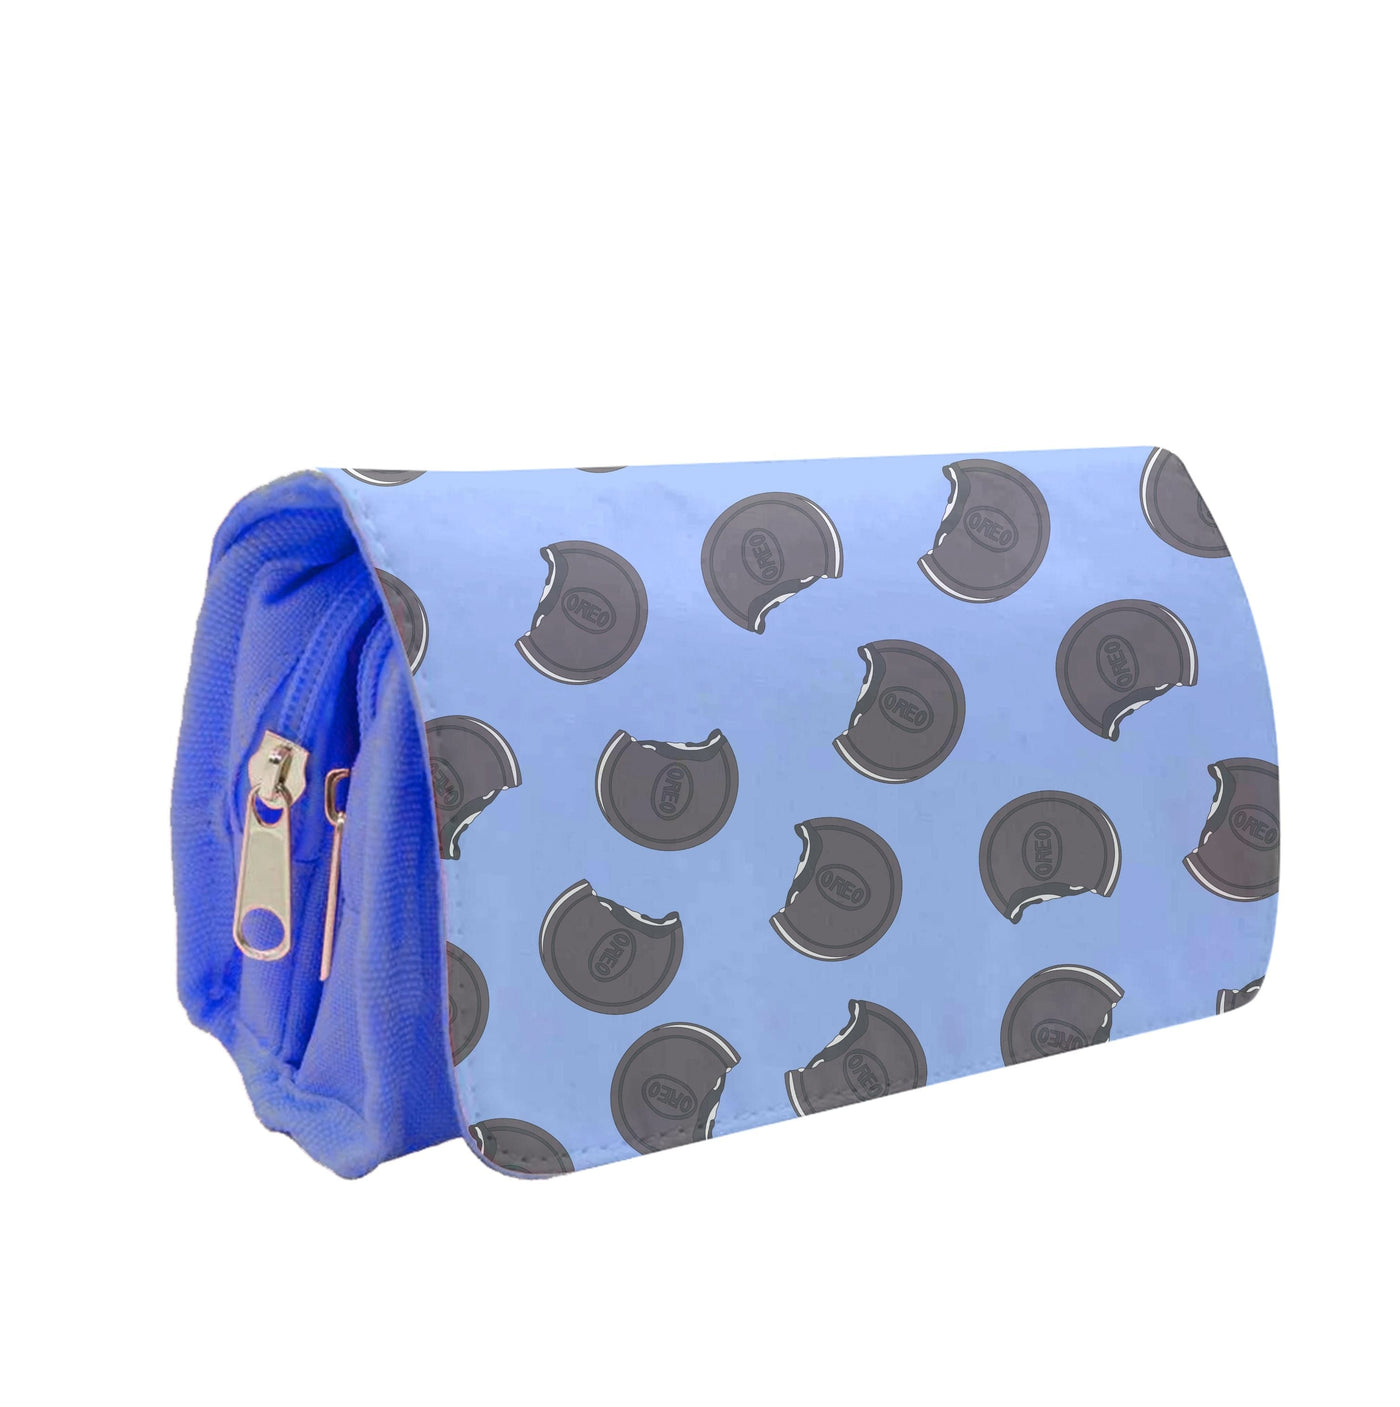 Oreos - Biscuits Patterns Pencil Case